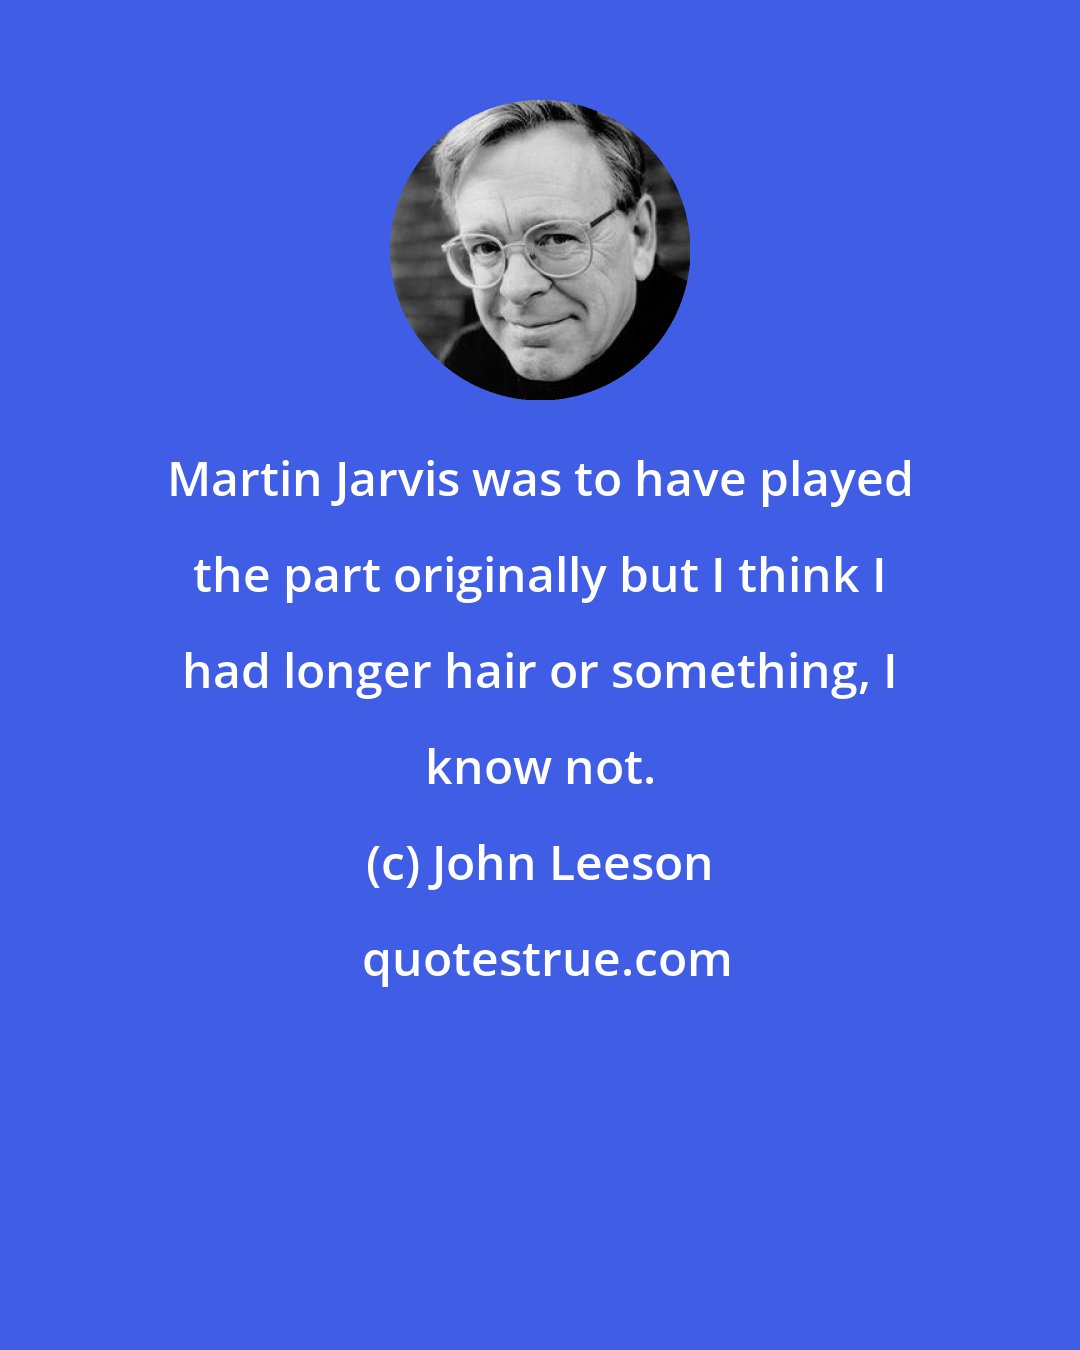 John Leeson: Martin Jarvis was to have played the part originally but I think I had longer hair or something, I know not.